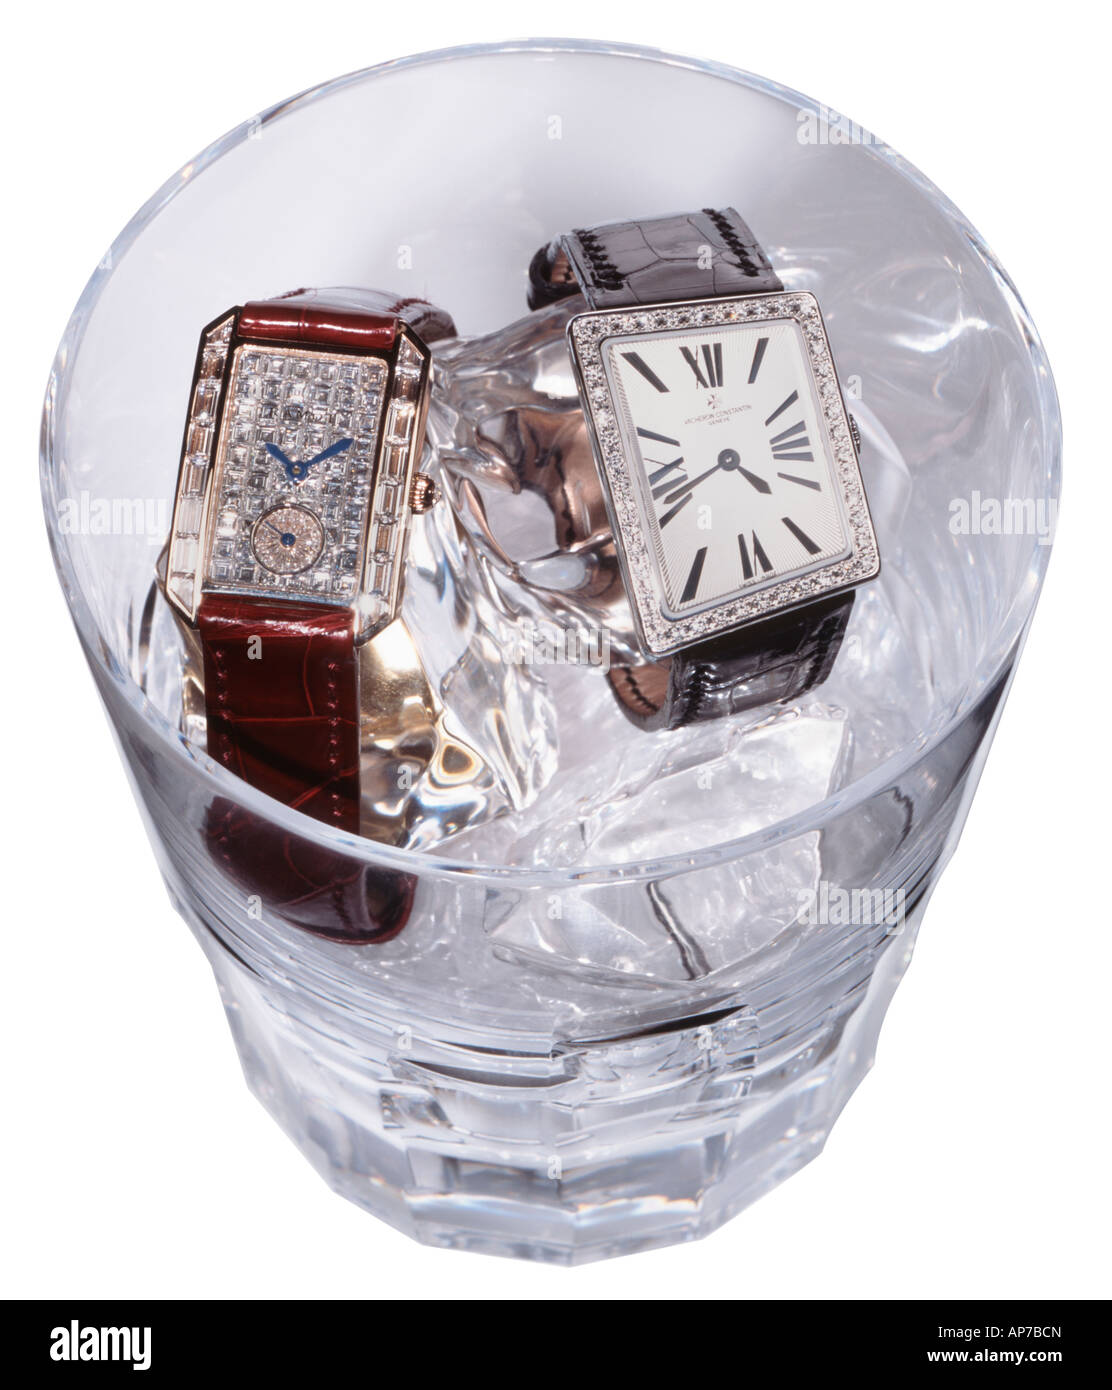 Watches in a cocktail glass Stock Photo